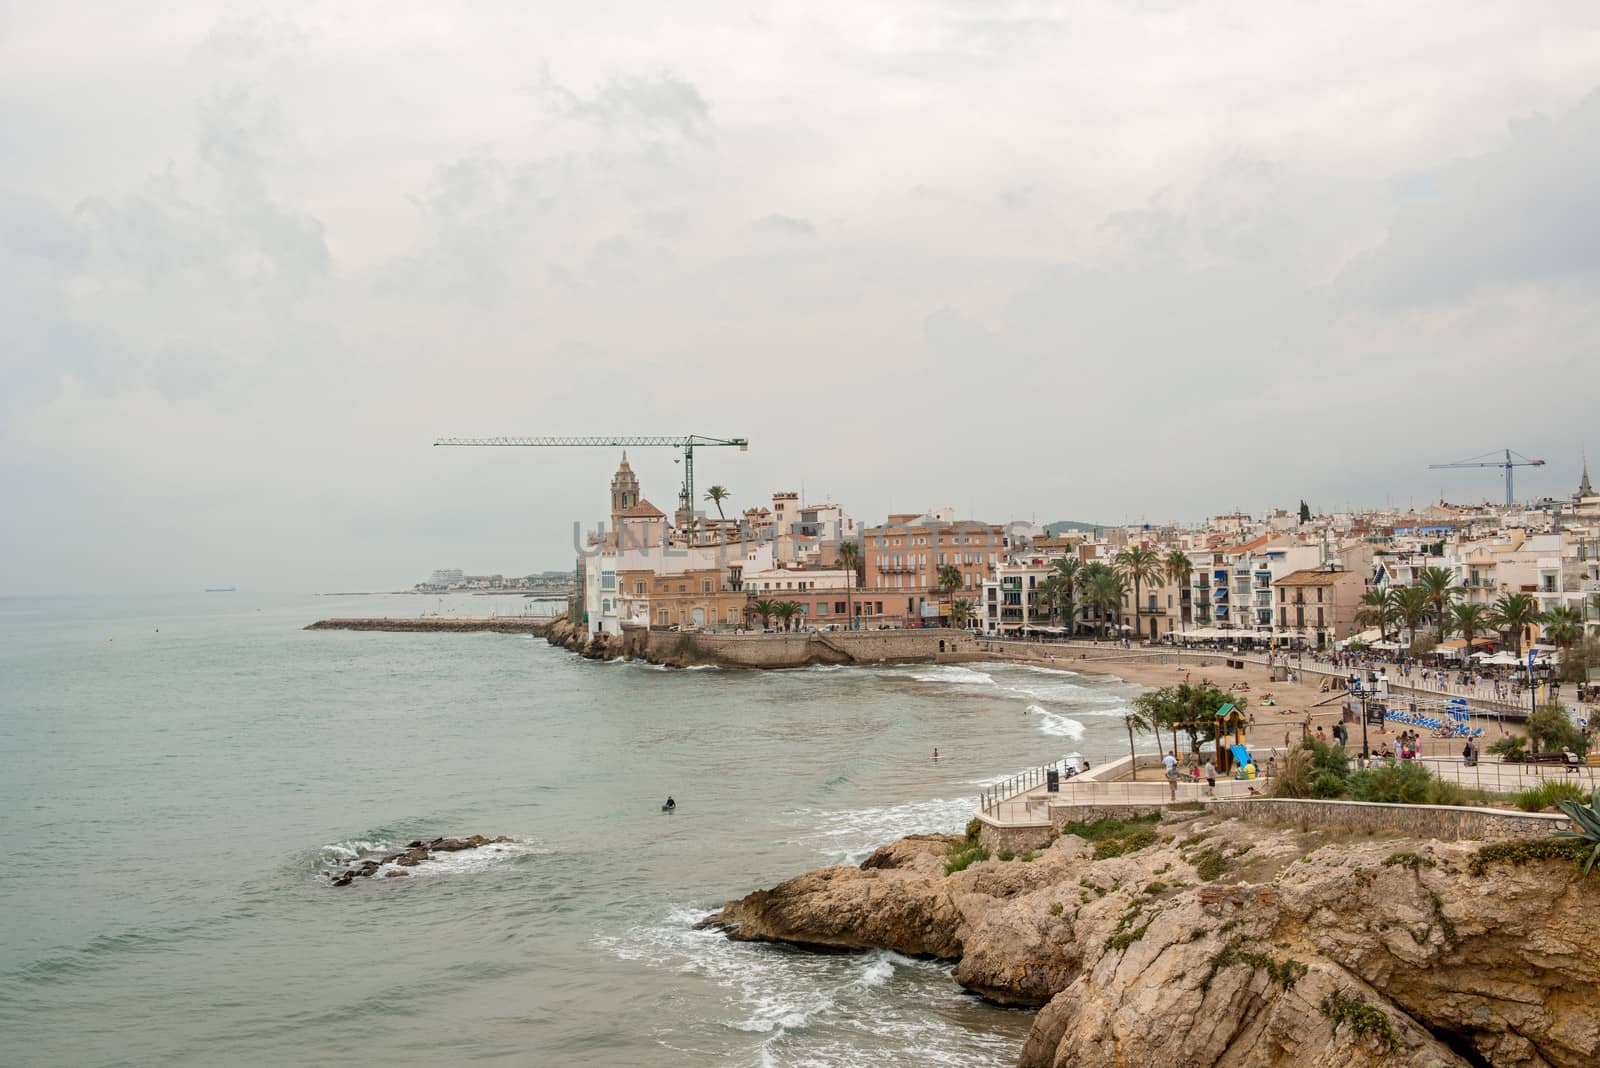 Beaches in Sitges, Spain by Marcus